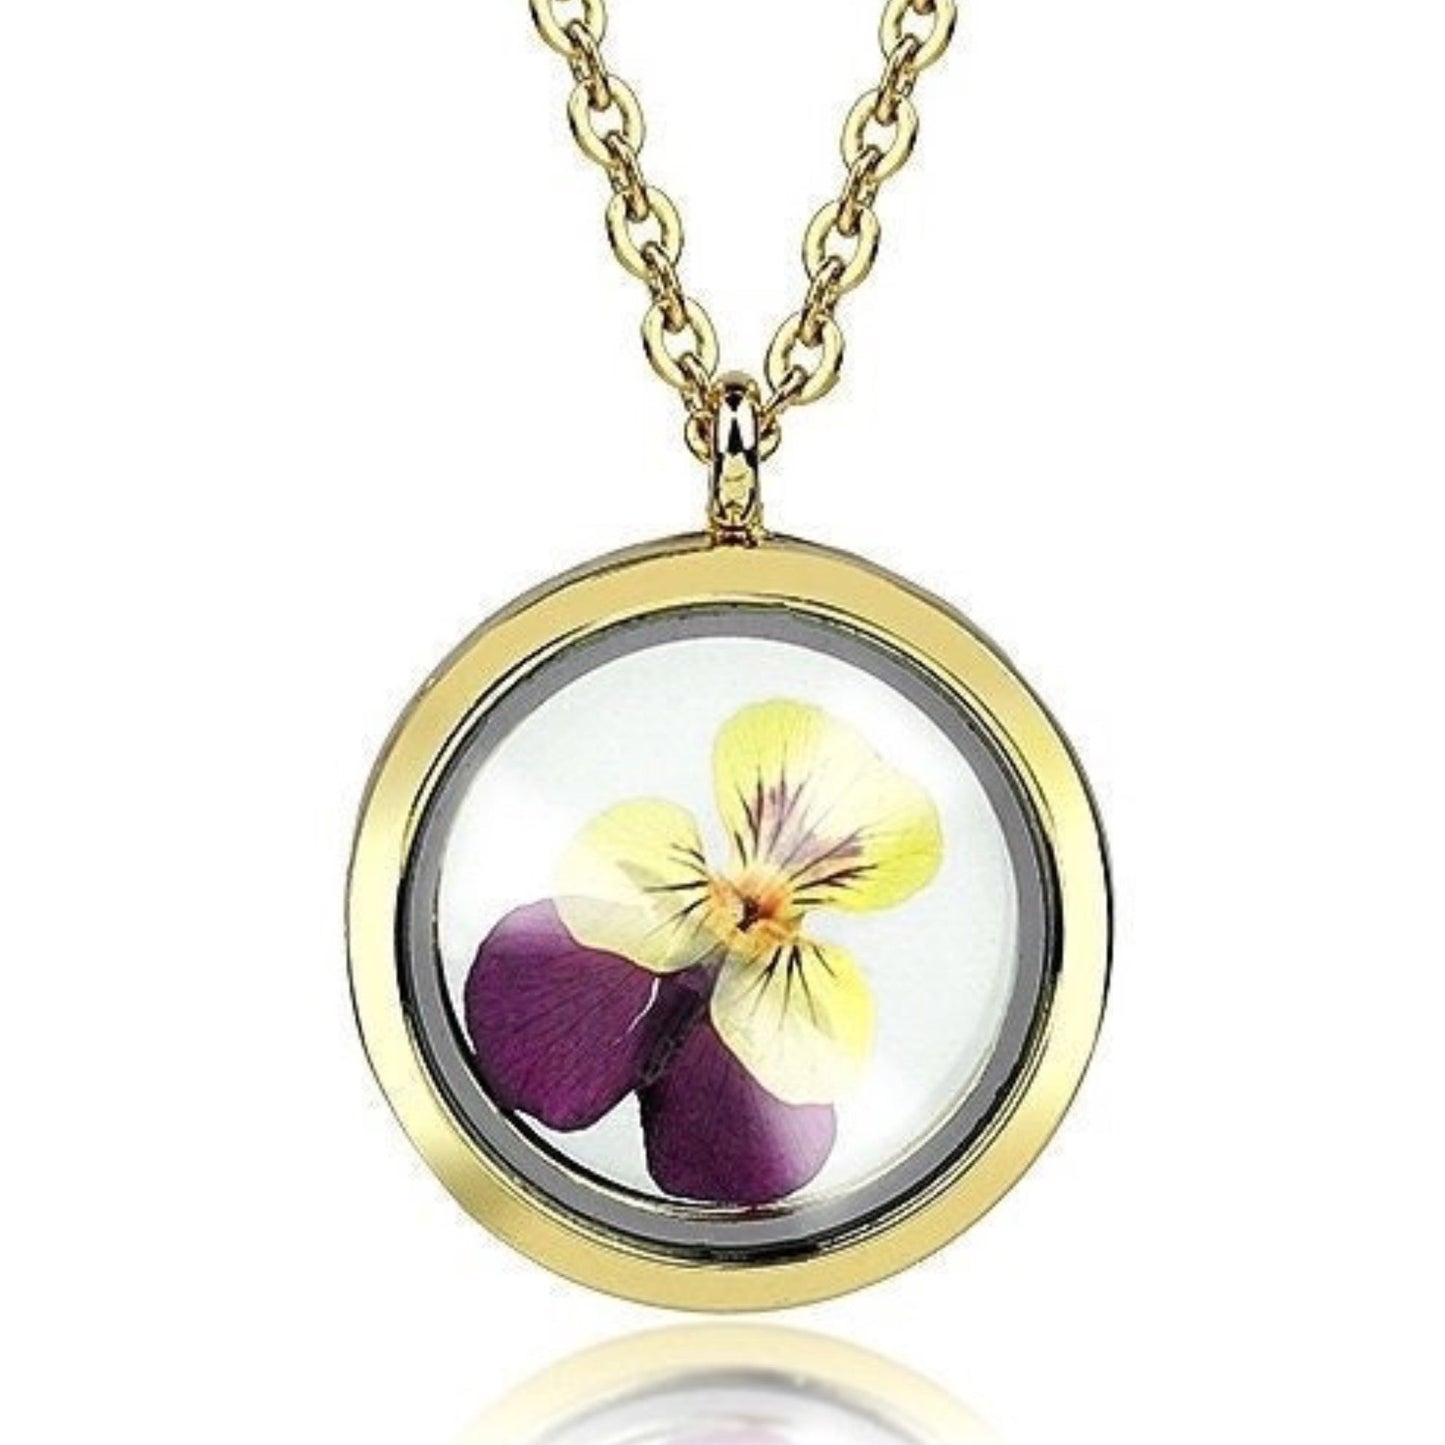 Pansy Glass Gold Locket Pendant Chain - Gold Plated Botany Floral Plants Genuine Flowers Necklace - VIK-71